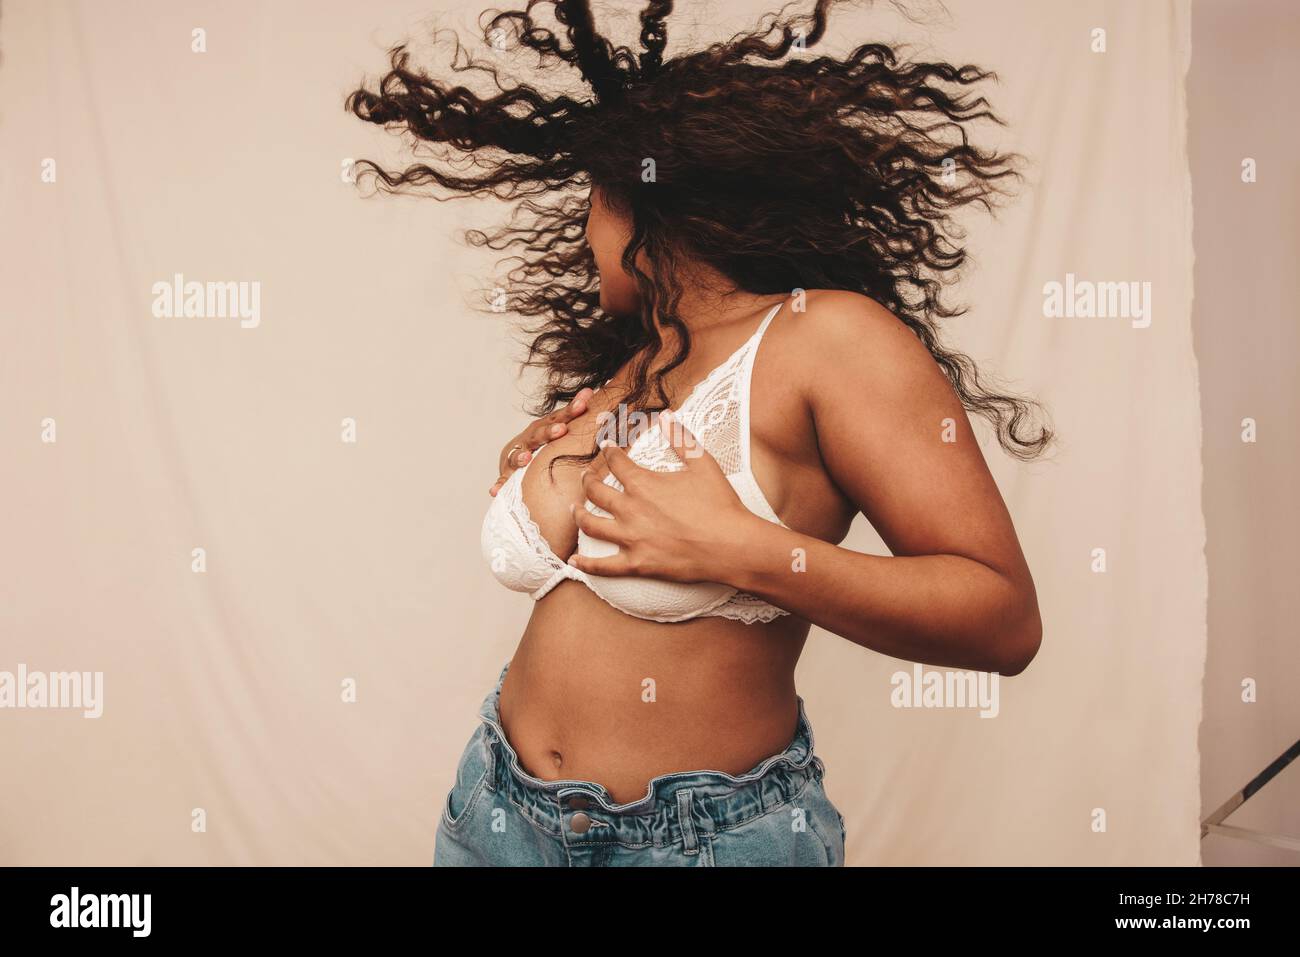 Young woman whipping her hair and embracing her body in a studio. Confident young woman having fun against a studio background. Body positive young wo Stock Photo